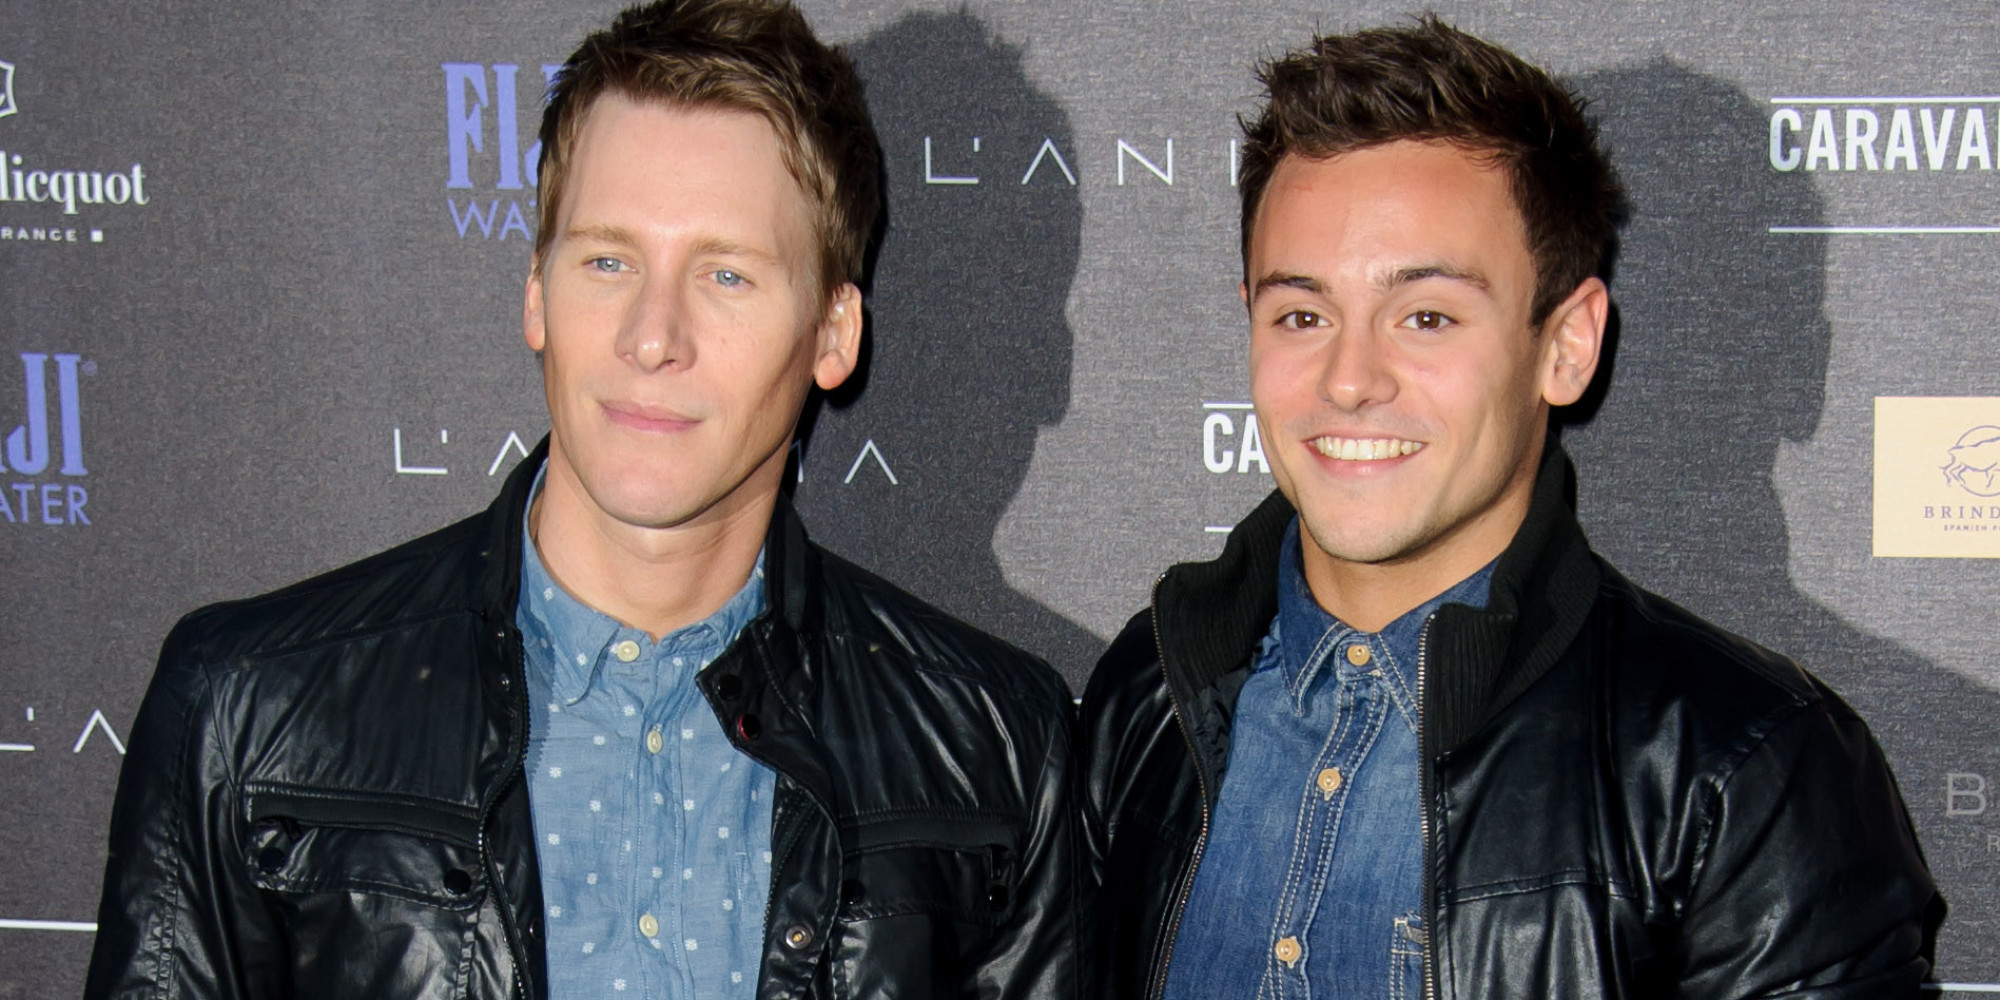 British athlete Tom Daley, left, and U.S screenwriter Dustin Lance Black arrive for the Battersea Power Station Annual Party at a central London venue, Wednesday, April. 30, 2014. (Photo by Jonathan Short/Invision/AP)